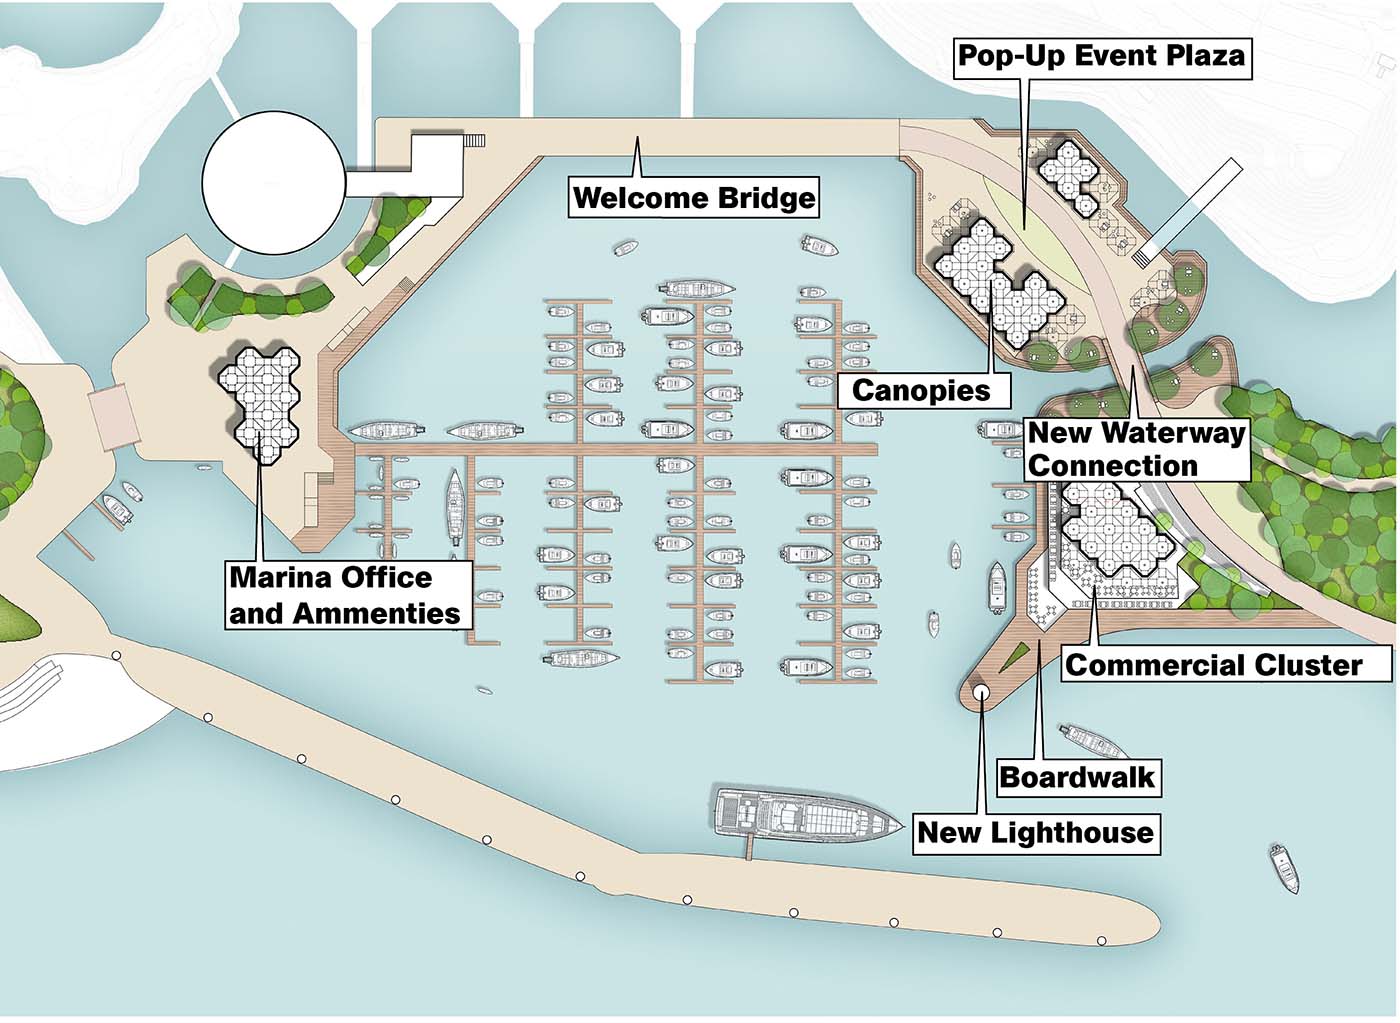 Rendered image of the marina with a new lighthouse, boardwalk, and commercial cluster on the south-east side. A new waterway connection splits the north-east and south-east sides. The north-east side shows canopies and a pop-up event plaza. The west side shows a marina office and amenities and a welcome bridge connects the east and west sides.